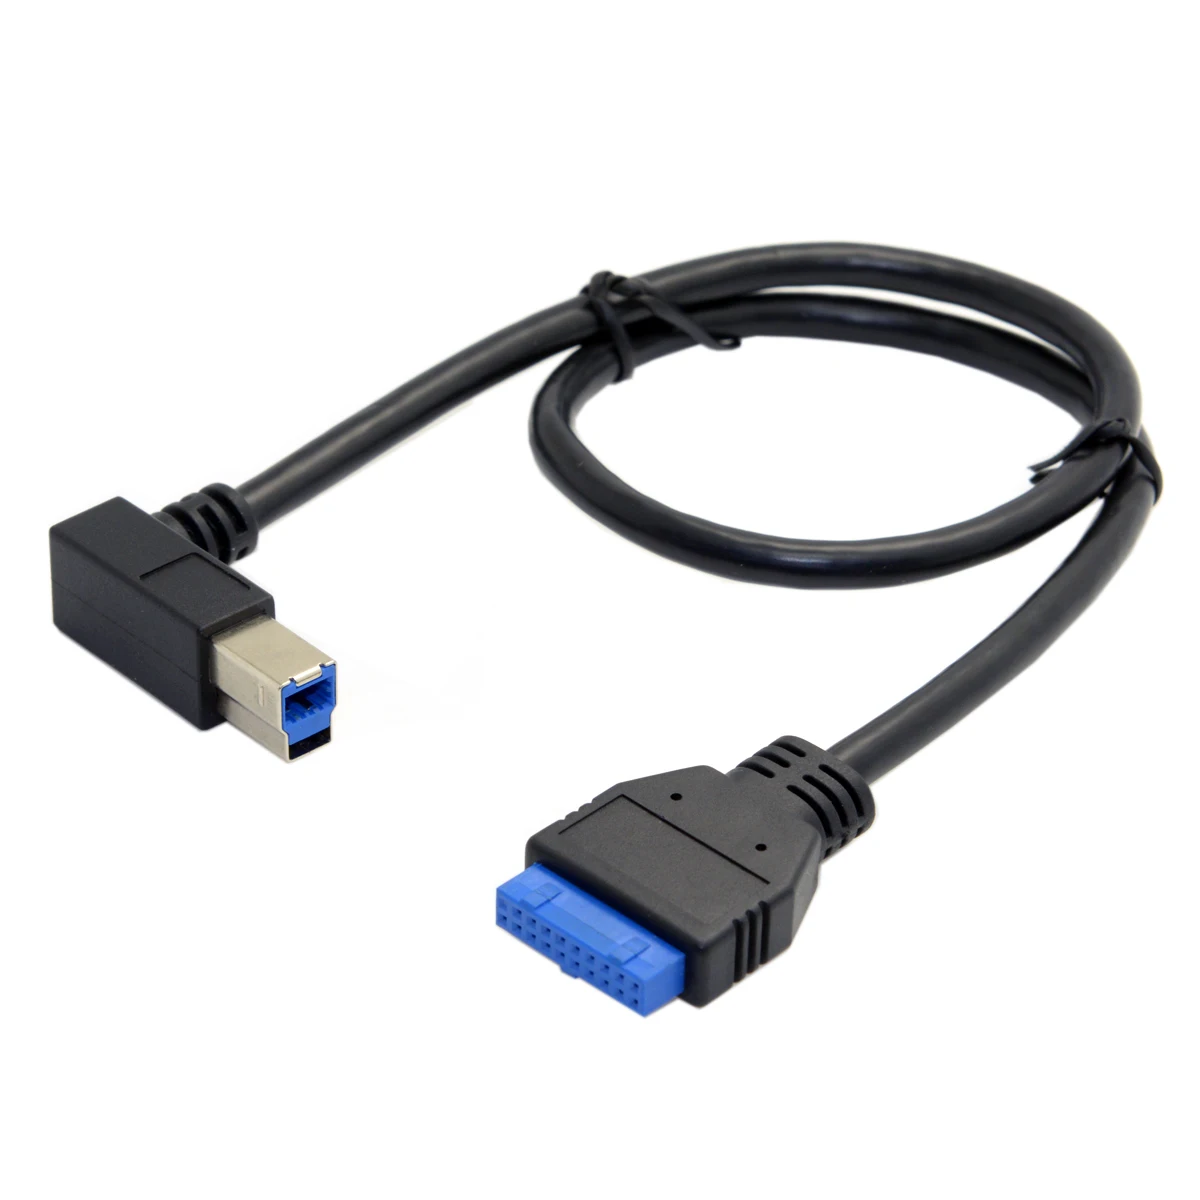 

qywo 50cm 90 Degree Left angled USB 3.0 B Type Male to USB3.0 Motherboard 19pin Header Cable